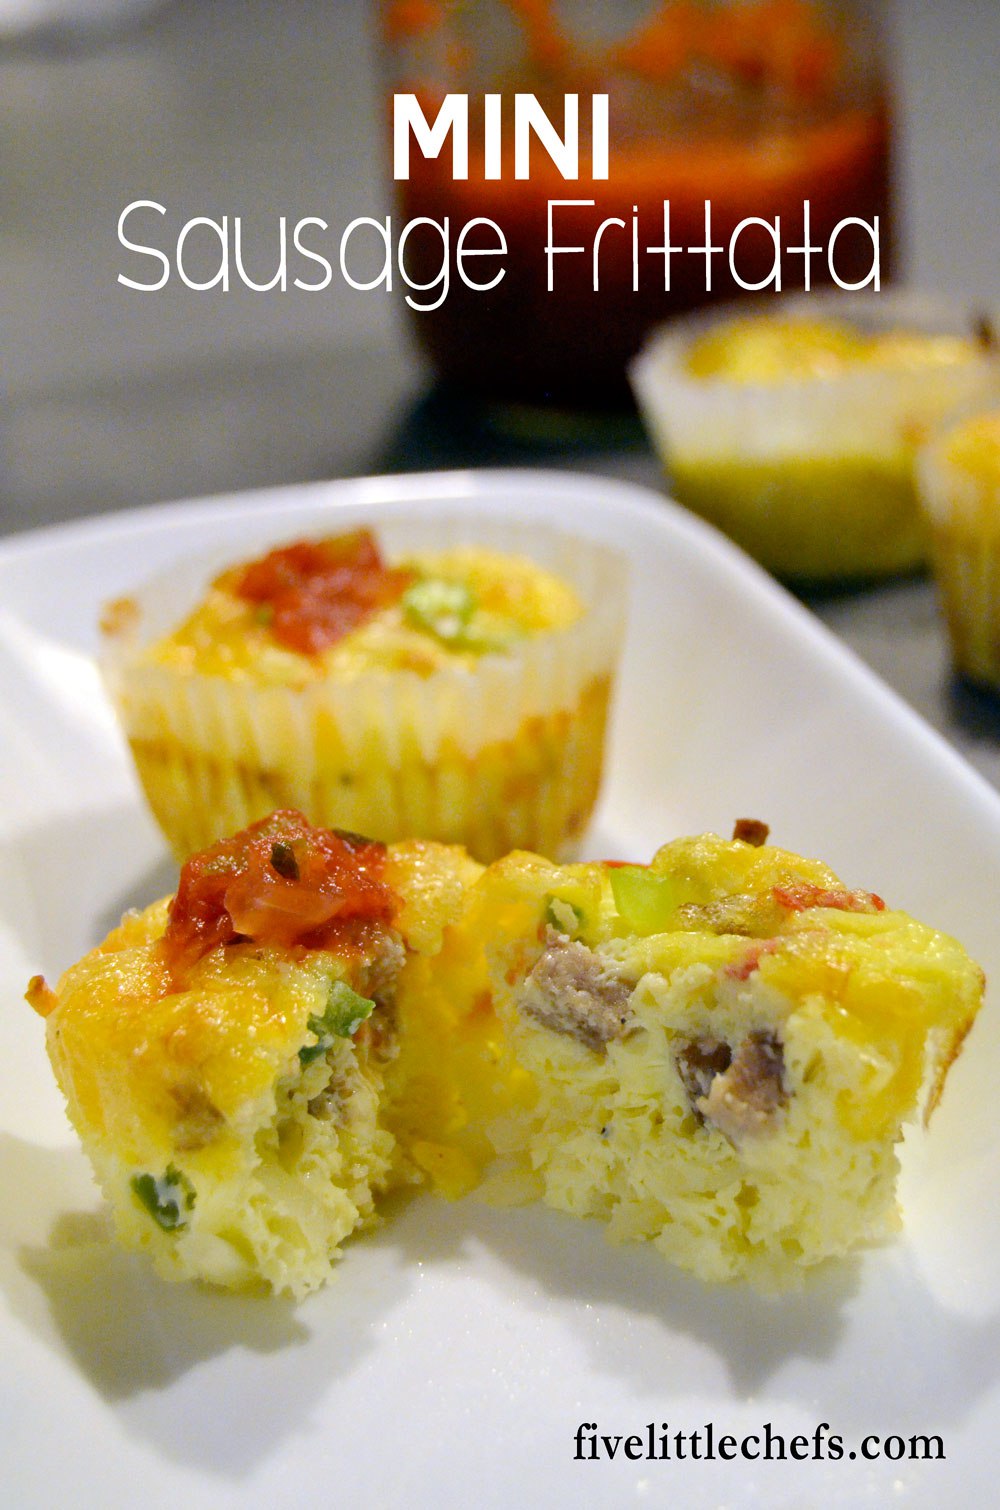 Mini sausage frittata with cheese, hash browns and eggs is one of my favorite breakfast recipes. It would also be great for brunch or the occasional breakfast for dinners.